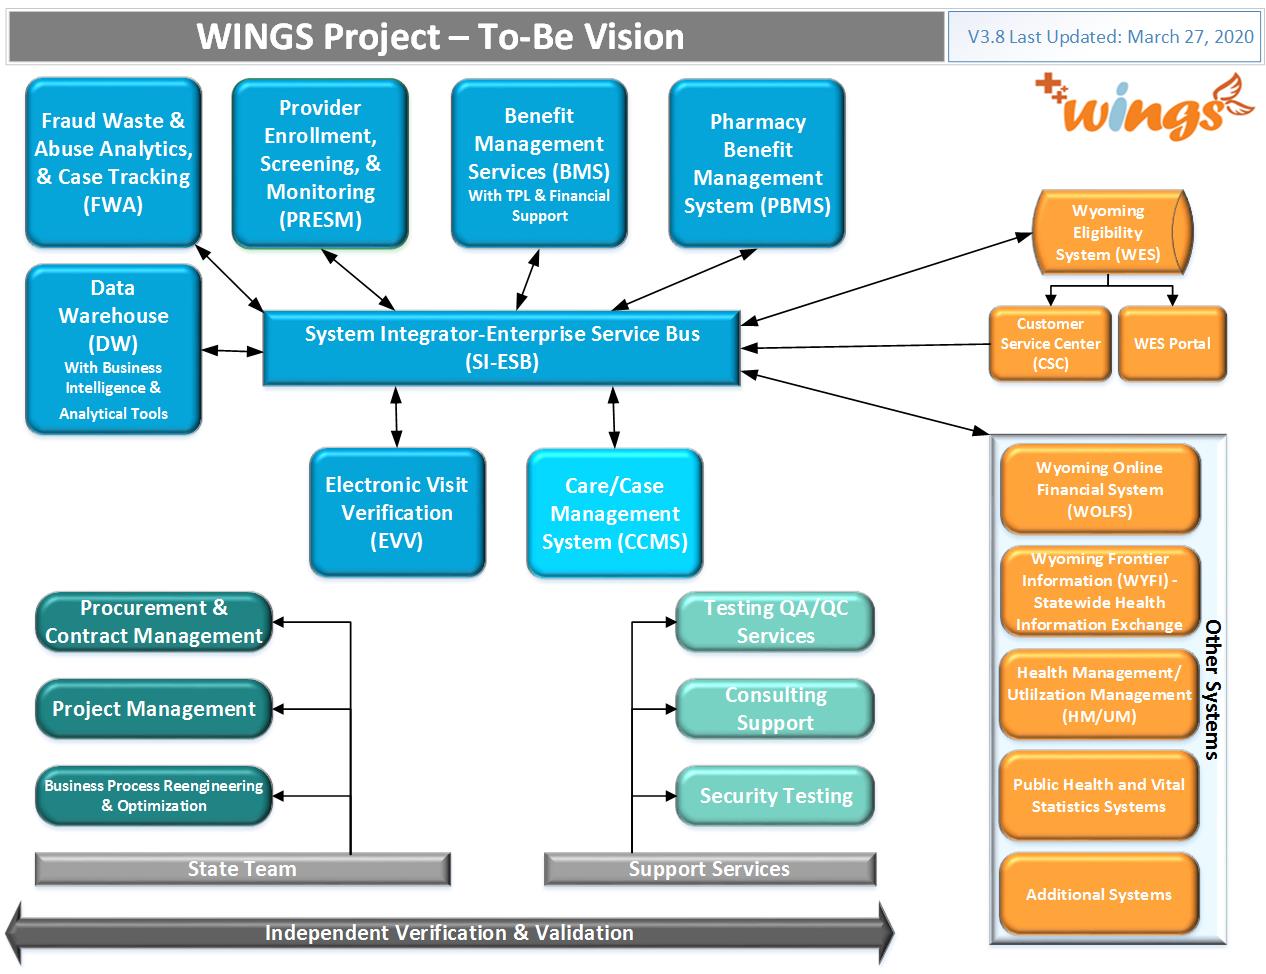 This is a graphical representation of the WINGS project, and how everything is connected.